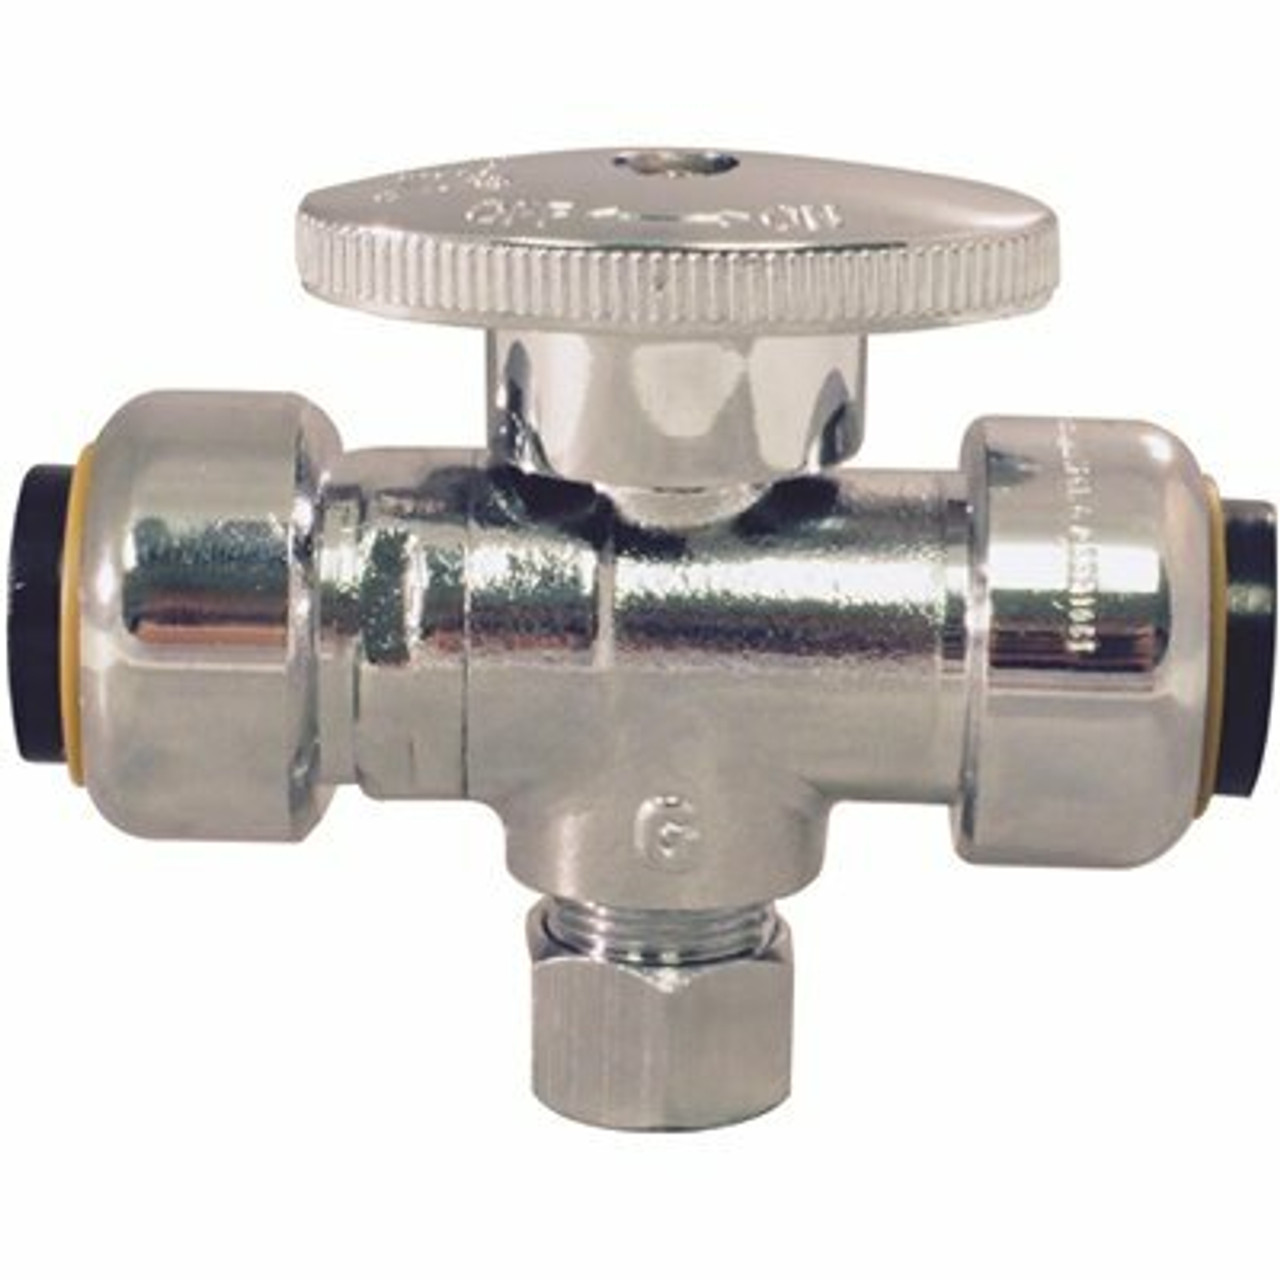 Tectite 1/2 In. Chrome-Plated Brass Push-To-Connect X 1/2 In. Push-To-Connect X 3/8 In. Compression Stop Tee Valve